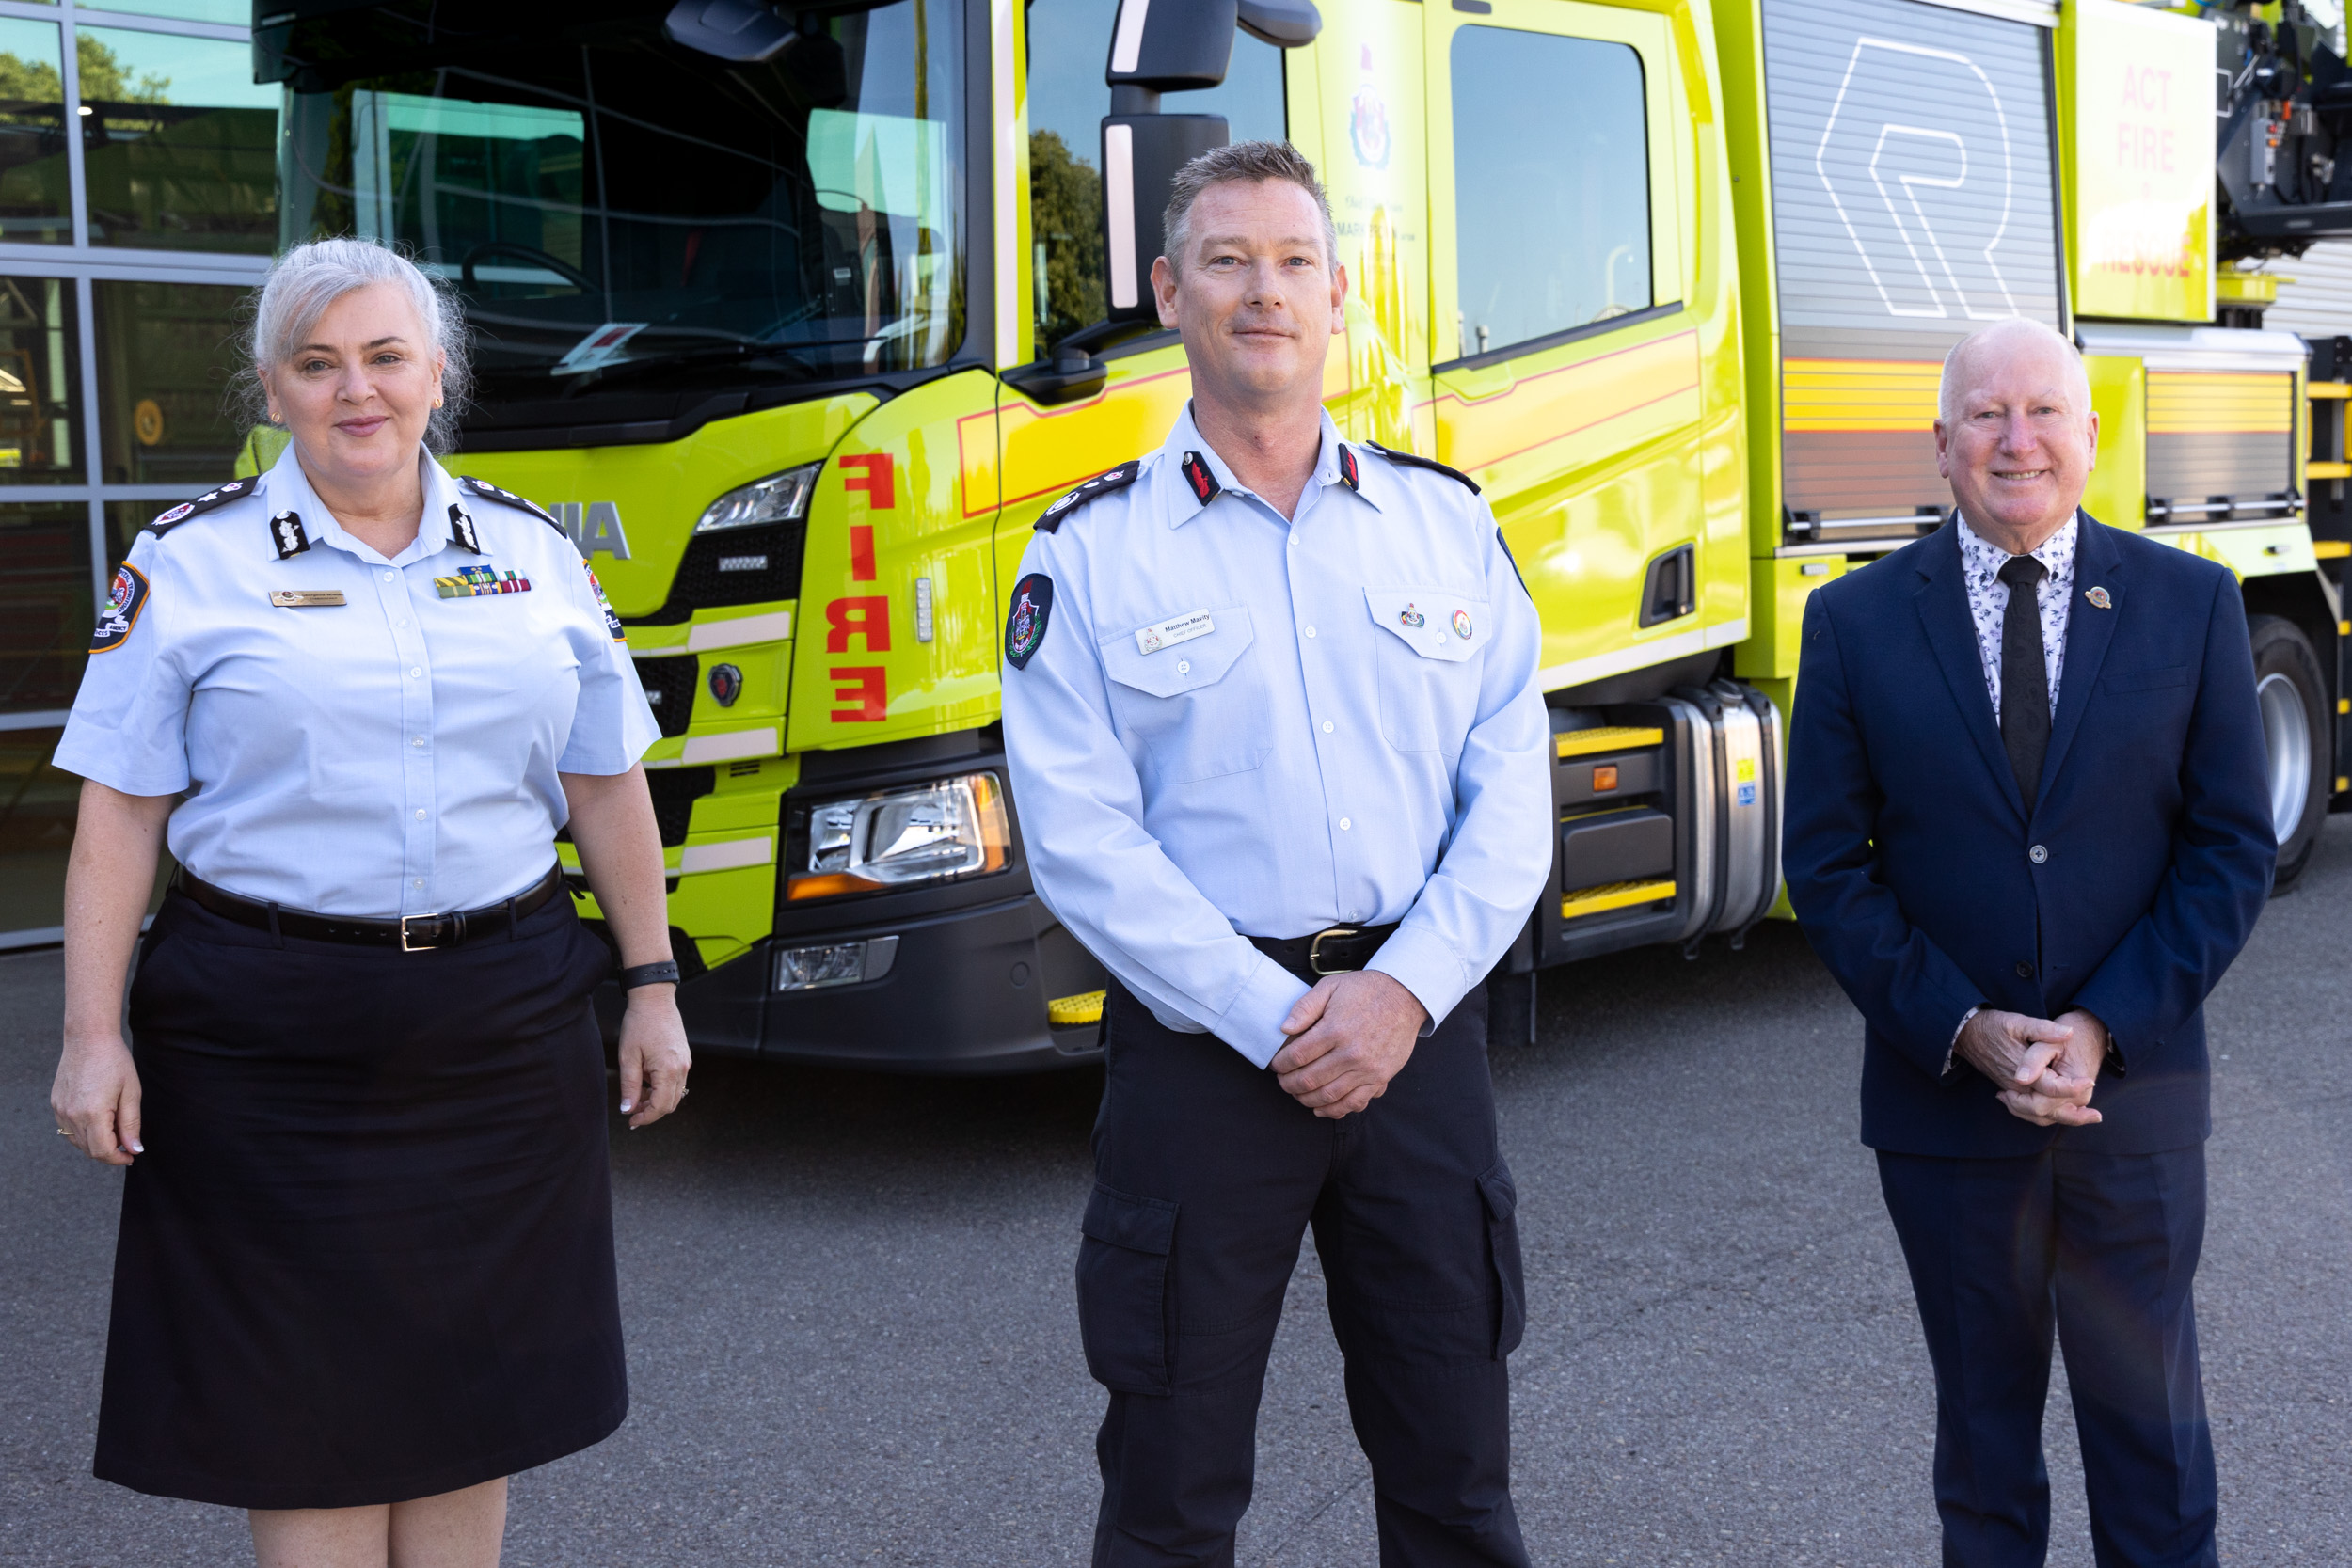 ACTESA Commissioner Georgeina Whelan, ACT Fire & Rescue Chief Officer Matthew Mavity, and Minister for Police & Emergency Services Mick Gentleman